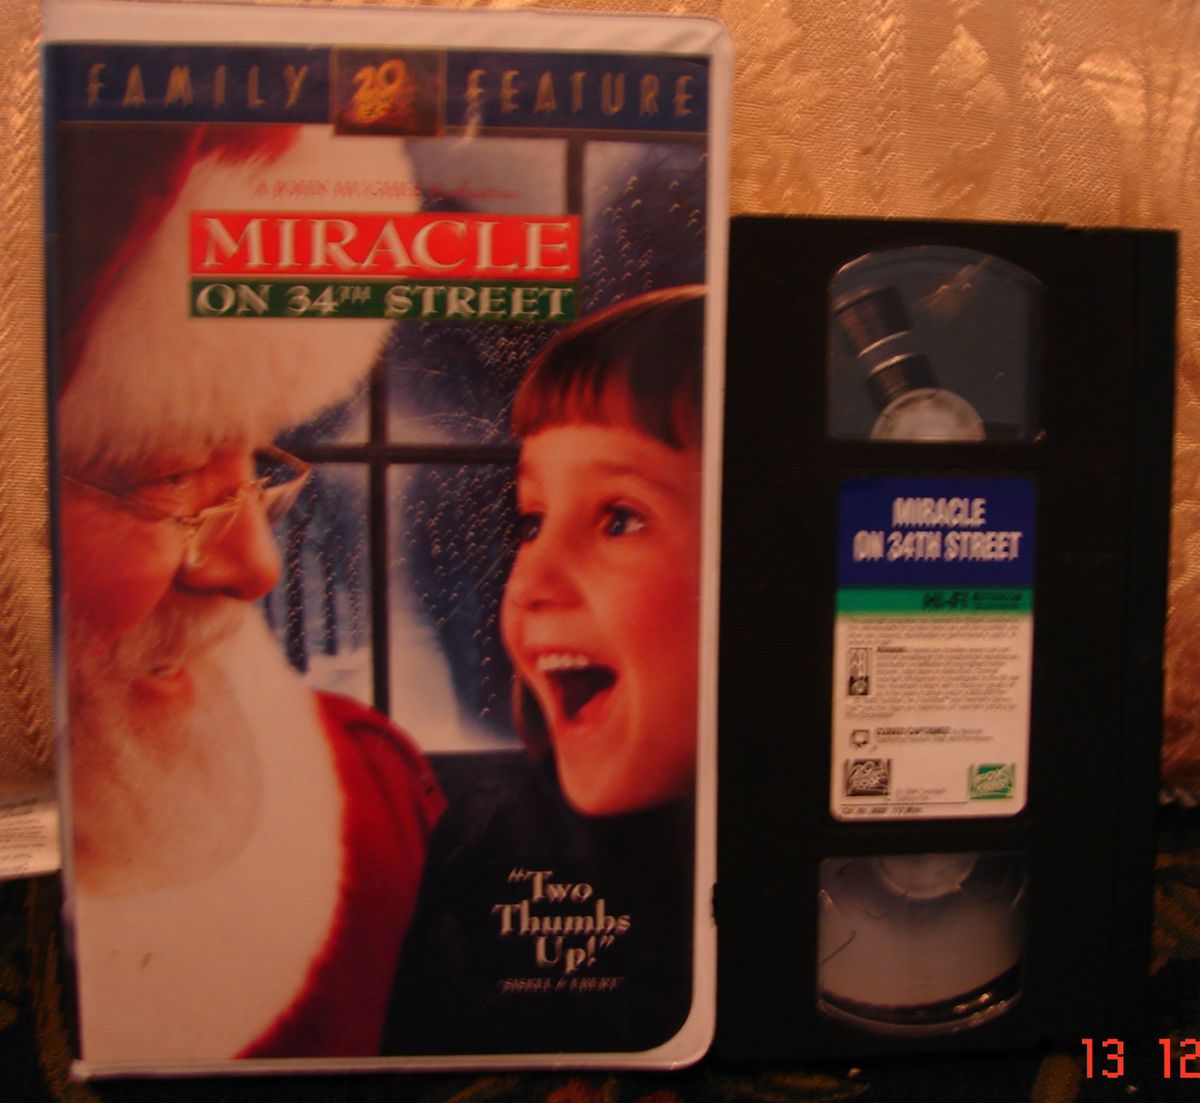 Miracle on 34th Street Updated John Hughes VHS Video SHIP Unlimited USA $5 00 086162868931  